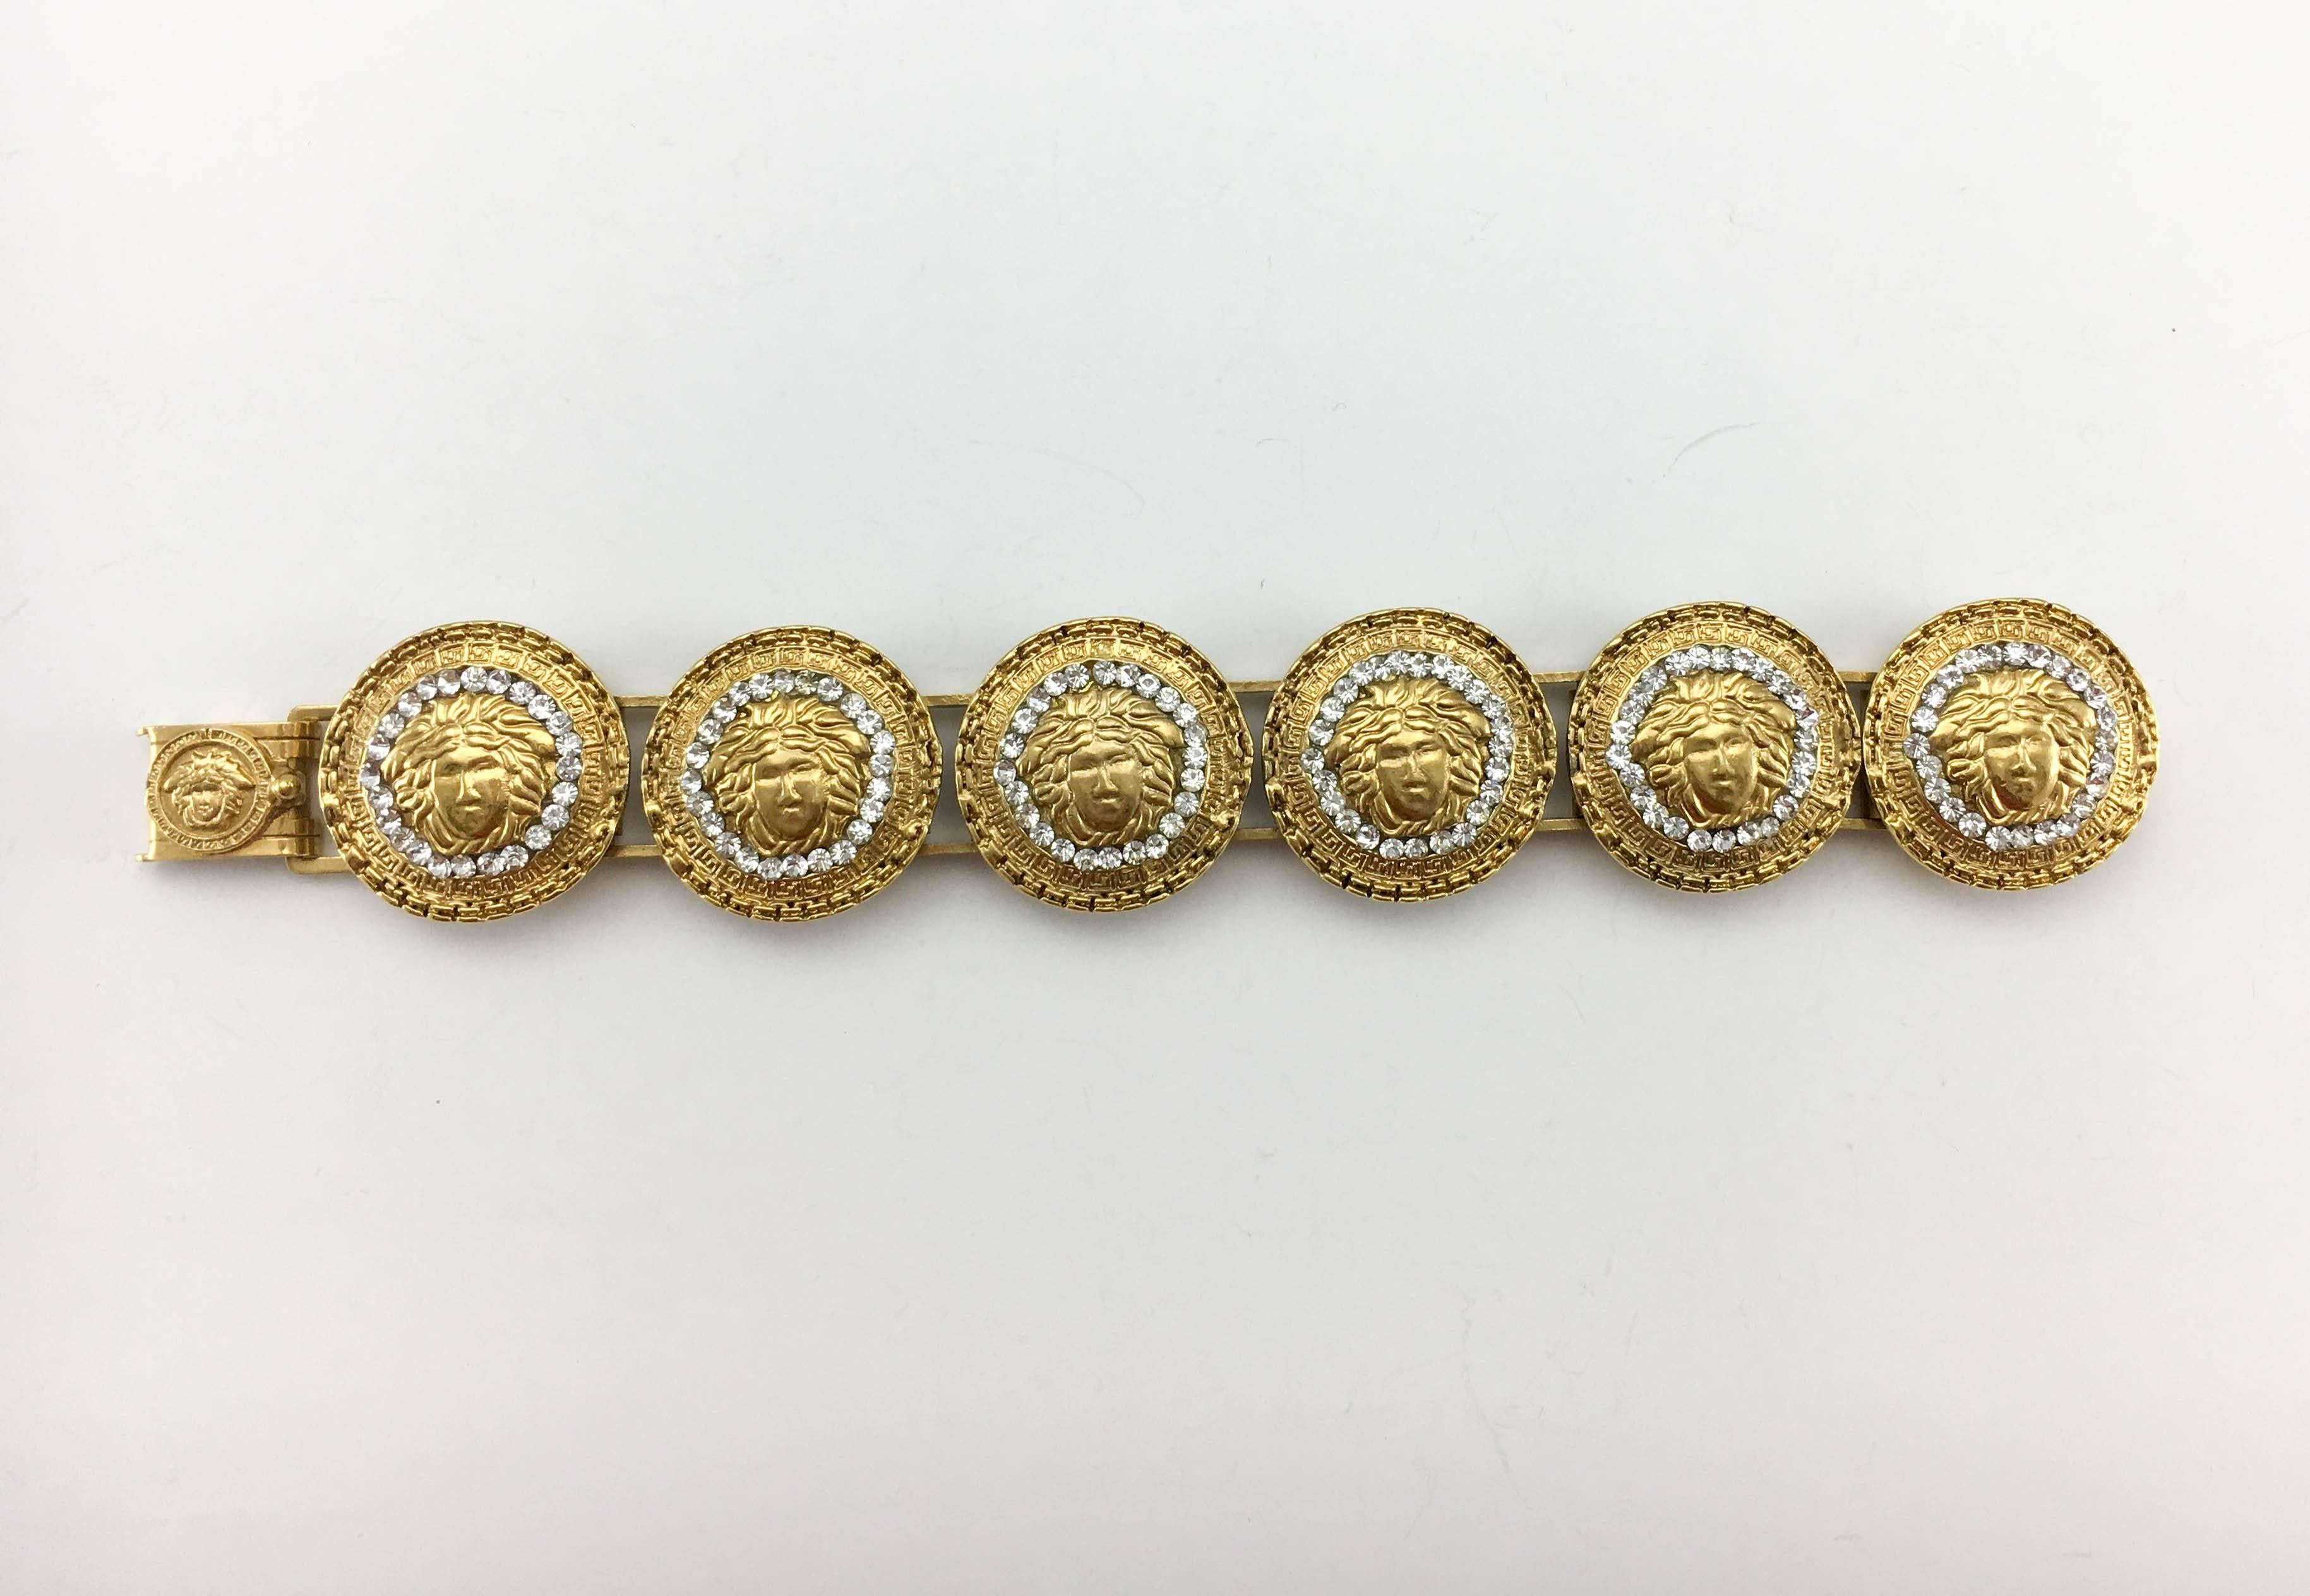 Vintage Gianni Versace Gold-Plated Medusa Head With Rhinestones Bracelet. This gorgeous piece by Versace dates back from the 1990’s, when Gianni Versace himself was still alive. Crafted in gold-plated metal, it has six medallions bearing the iconic